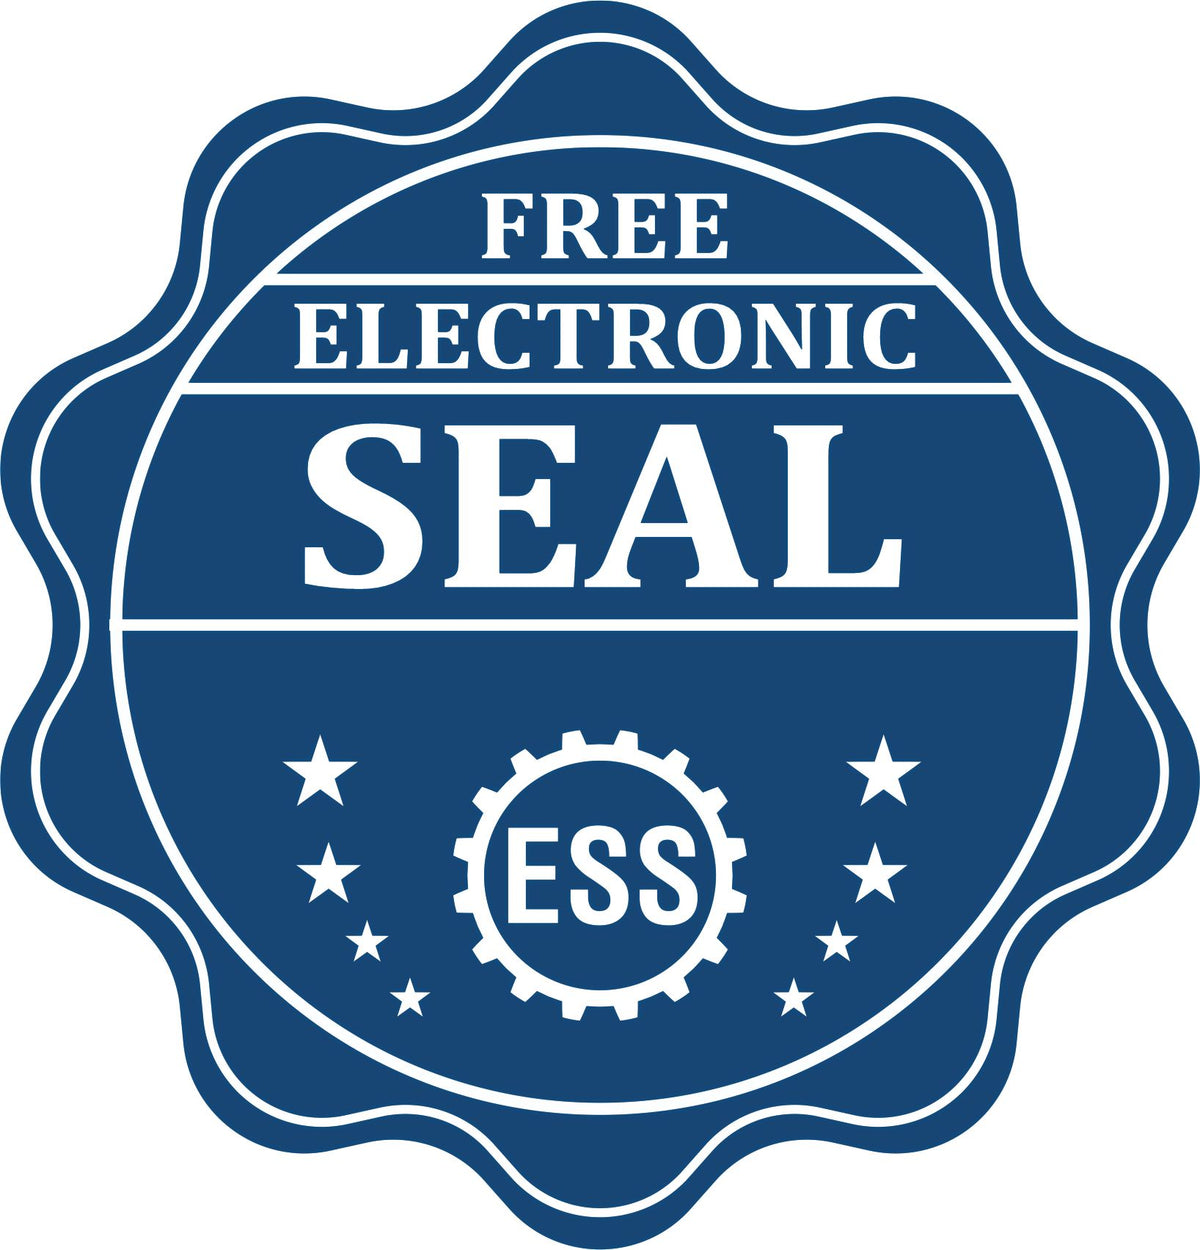 A badge showing a free electronic seal for the Heavy Duty Cast Iron South Carolina Engineer Seal Embosser with stars and the ESS gear on the emblem.